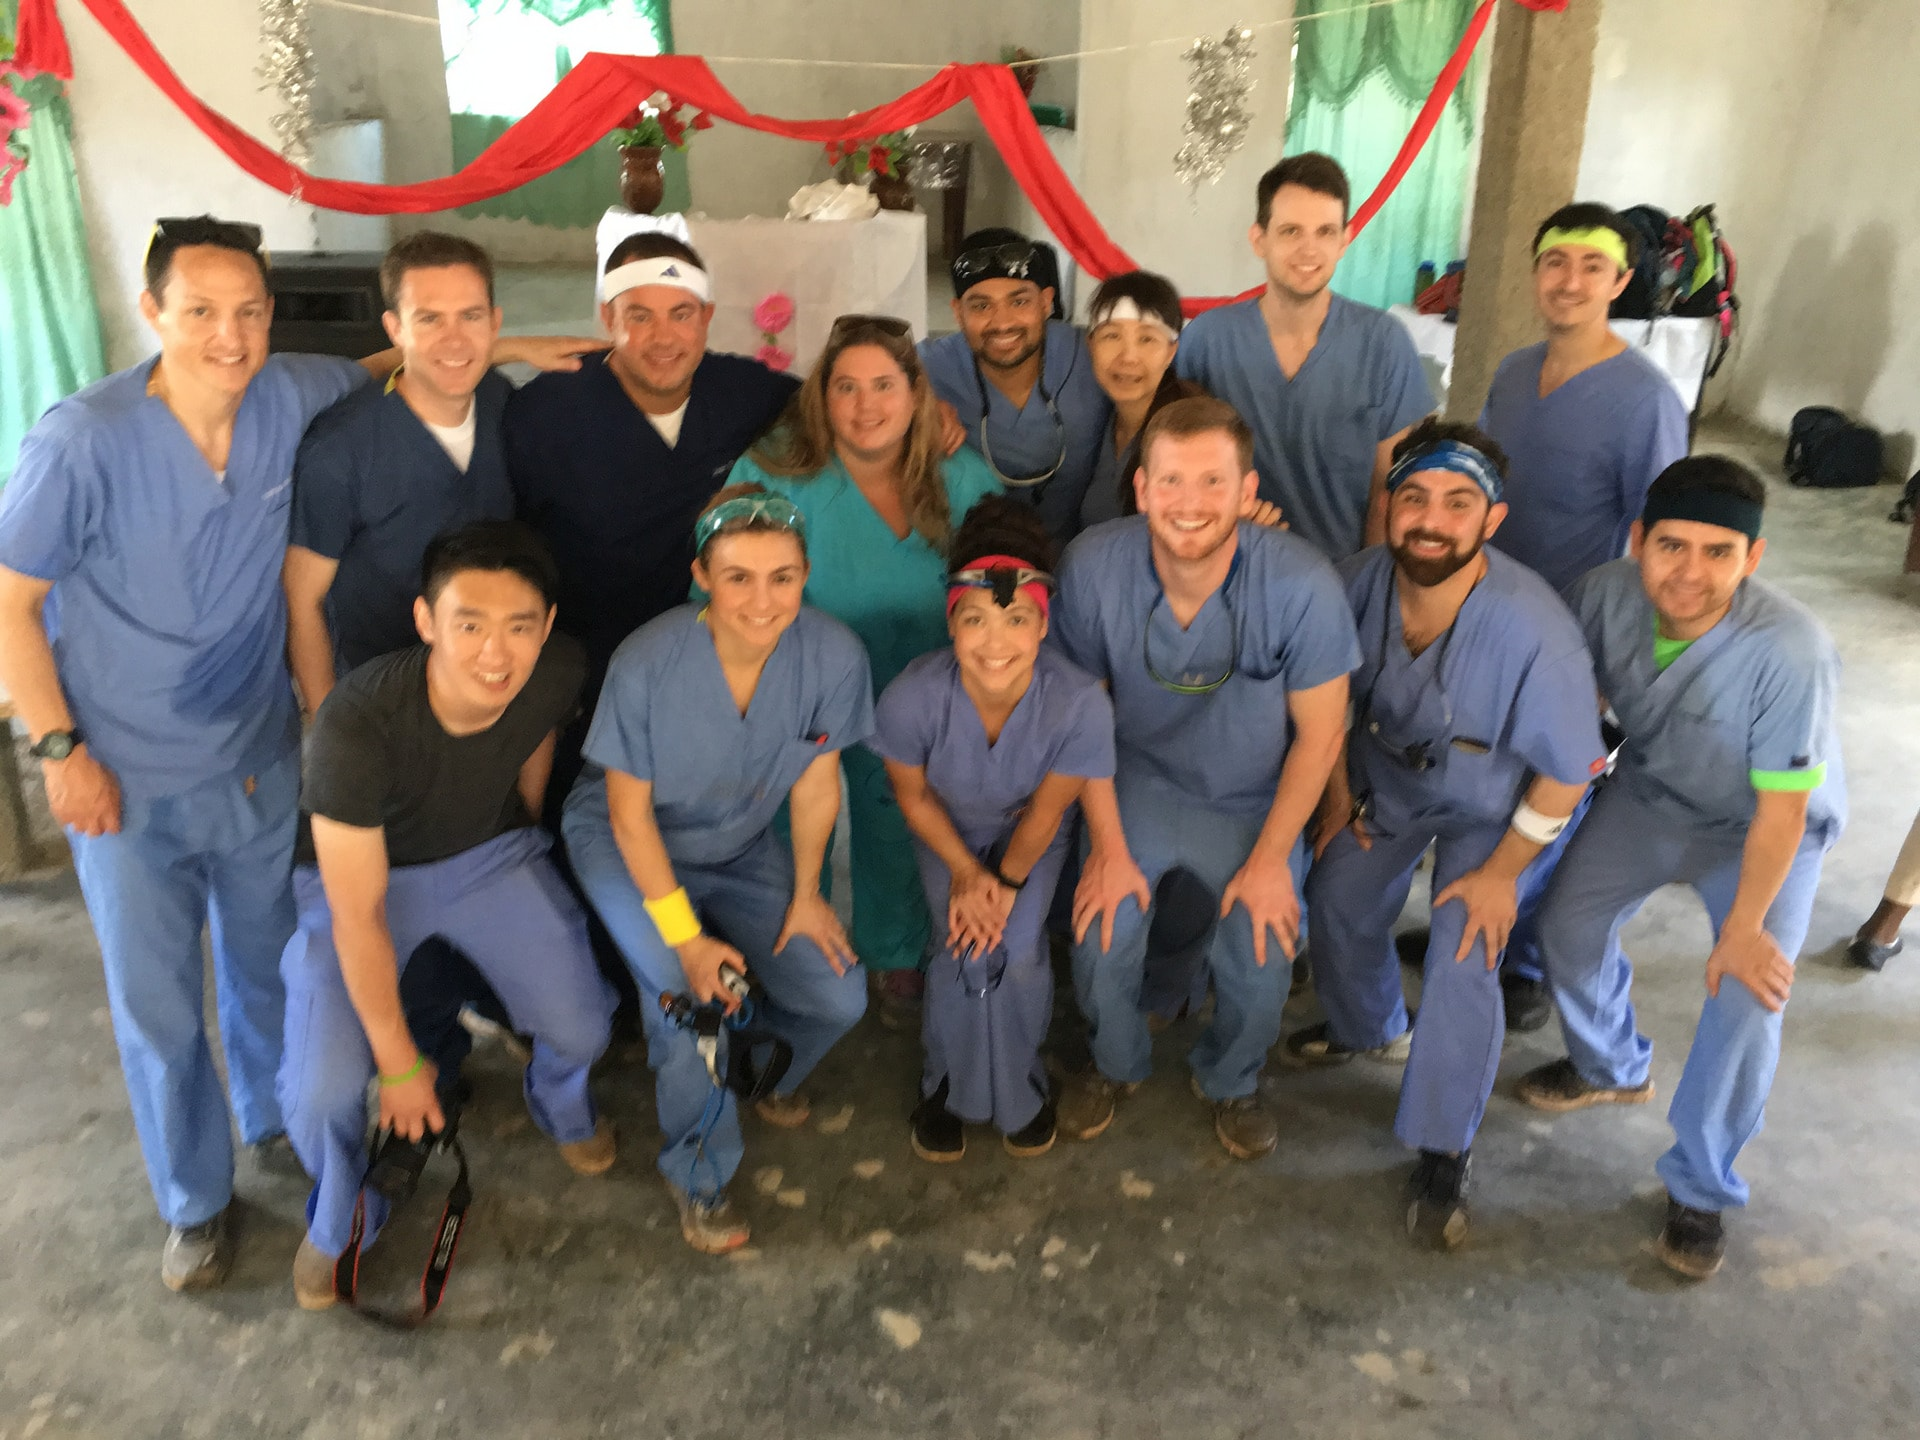 TheDailyFLoss-Benco-Dental- Incisal -Edge- DOC BRESLER'S CAVITY BUSTERS HAITI TRIP APRIL-MAY 2017 DOCTORS AND DENTAL STUDENTS FROM TEMPLE UNIVERSITY MAURICE H. KORNBERG SCHOOL OF DENTIS